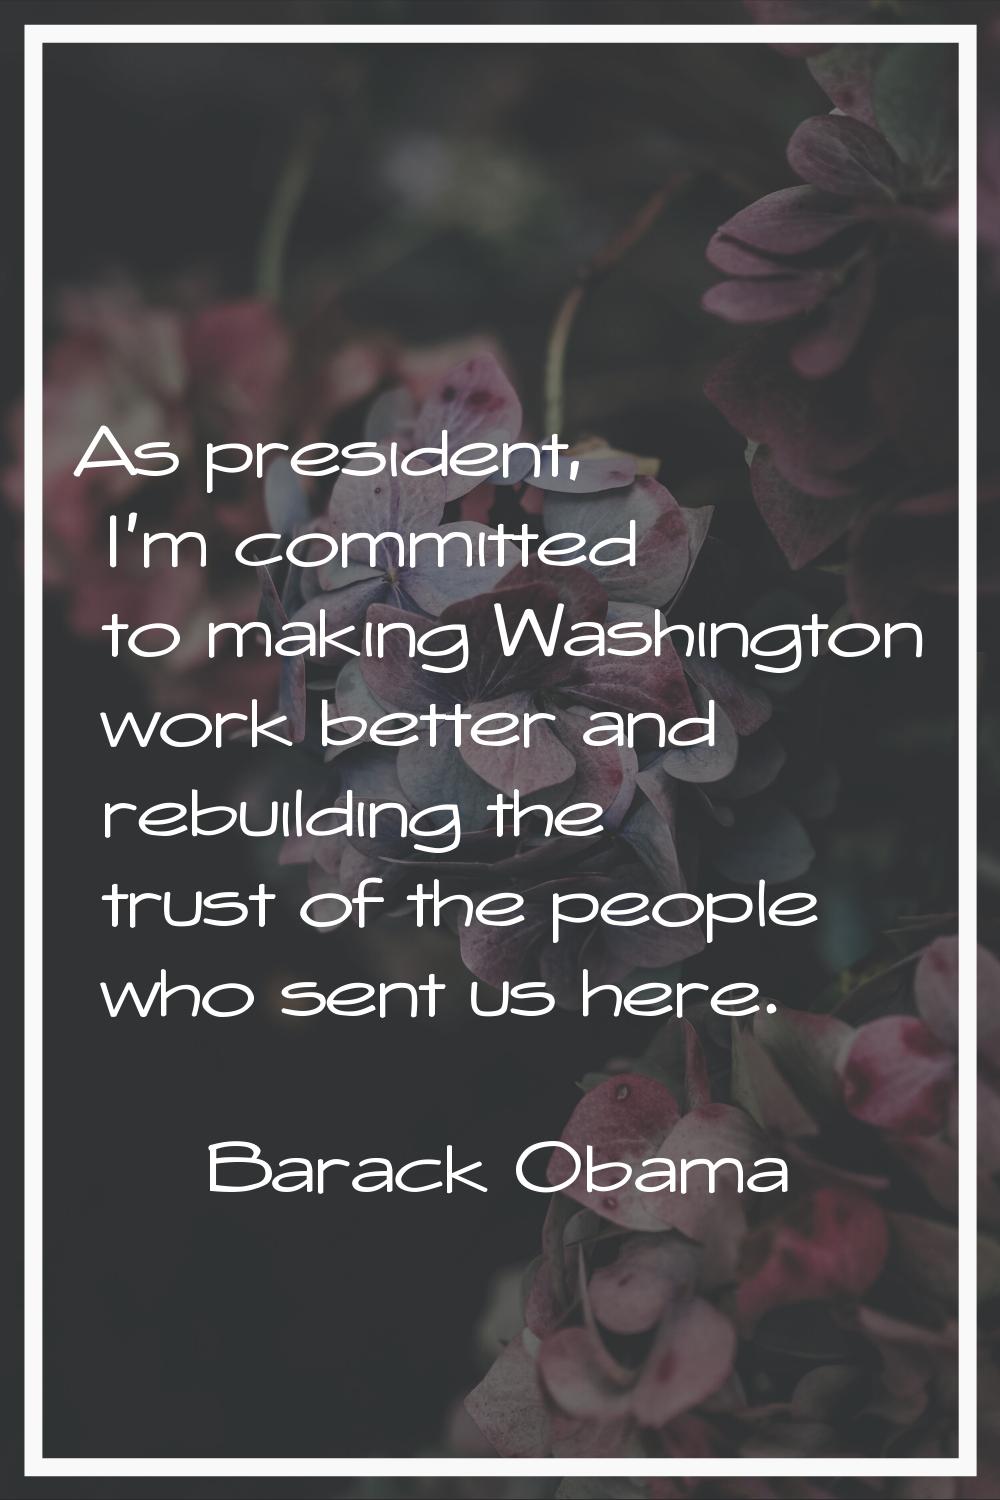 As president, I'm committed to making Washington work better and rebuilding the trust of the people